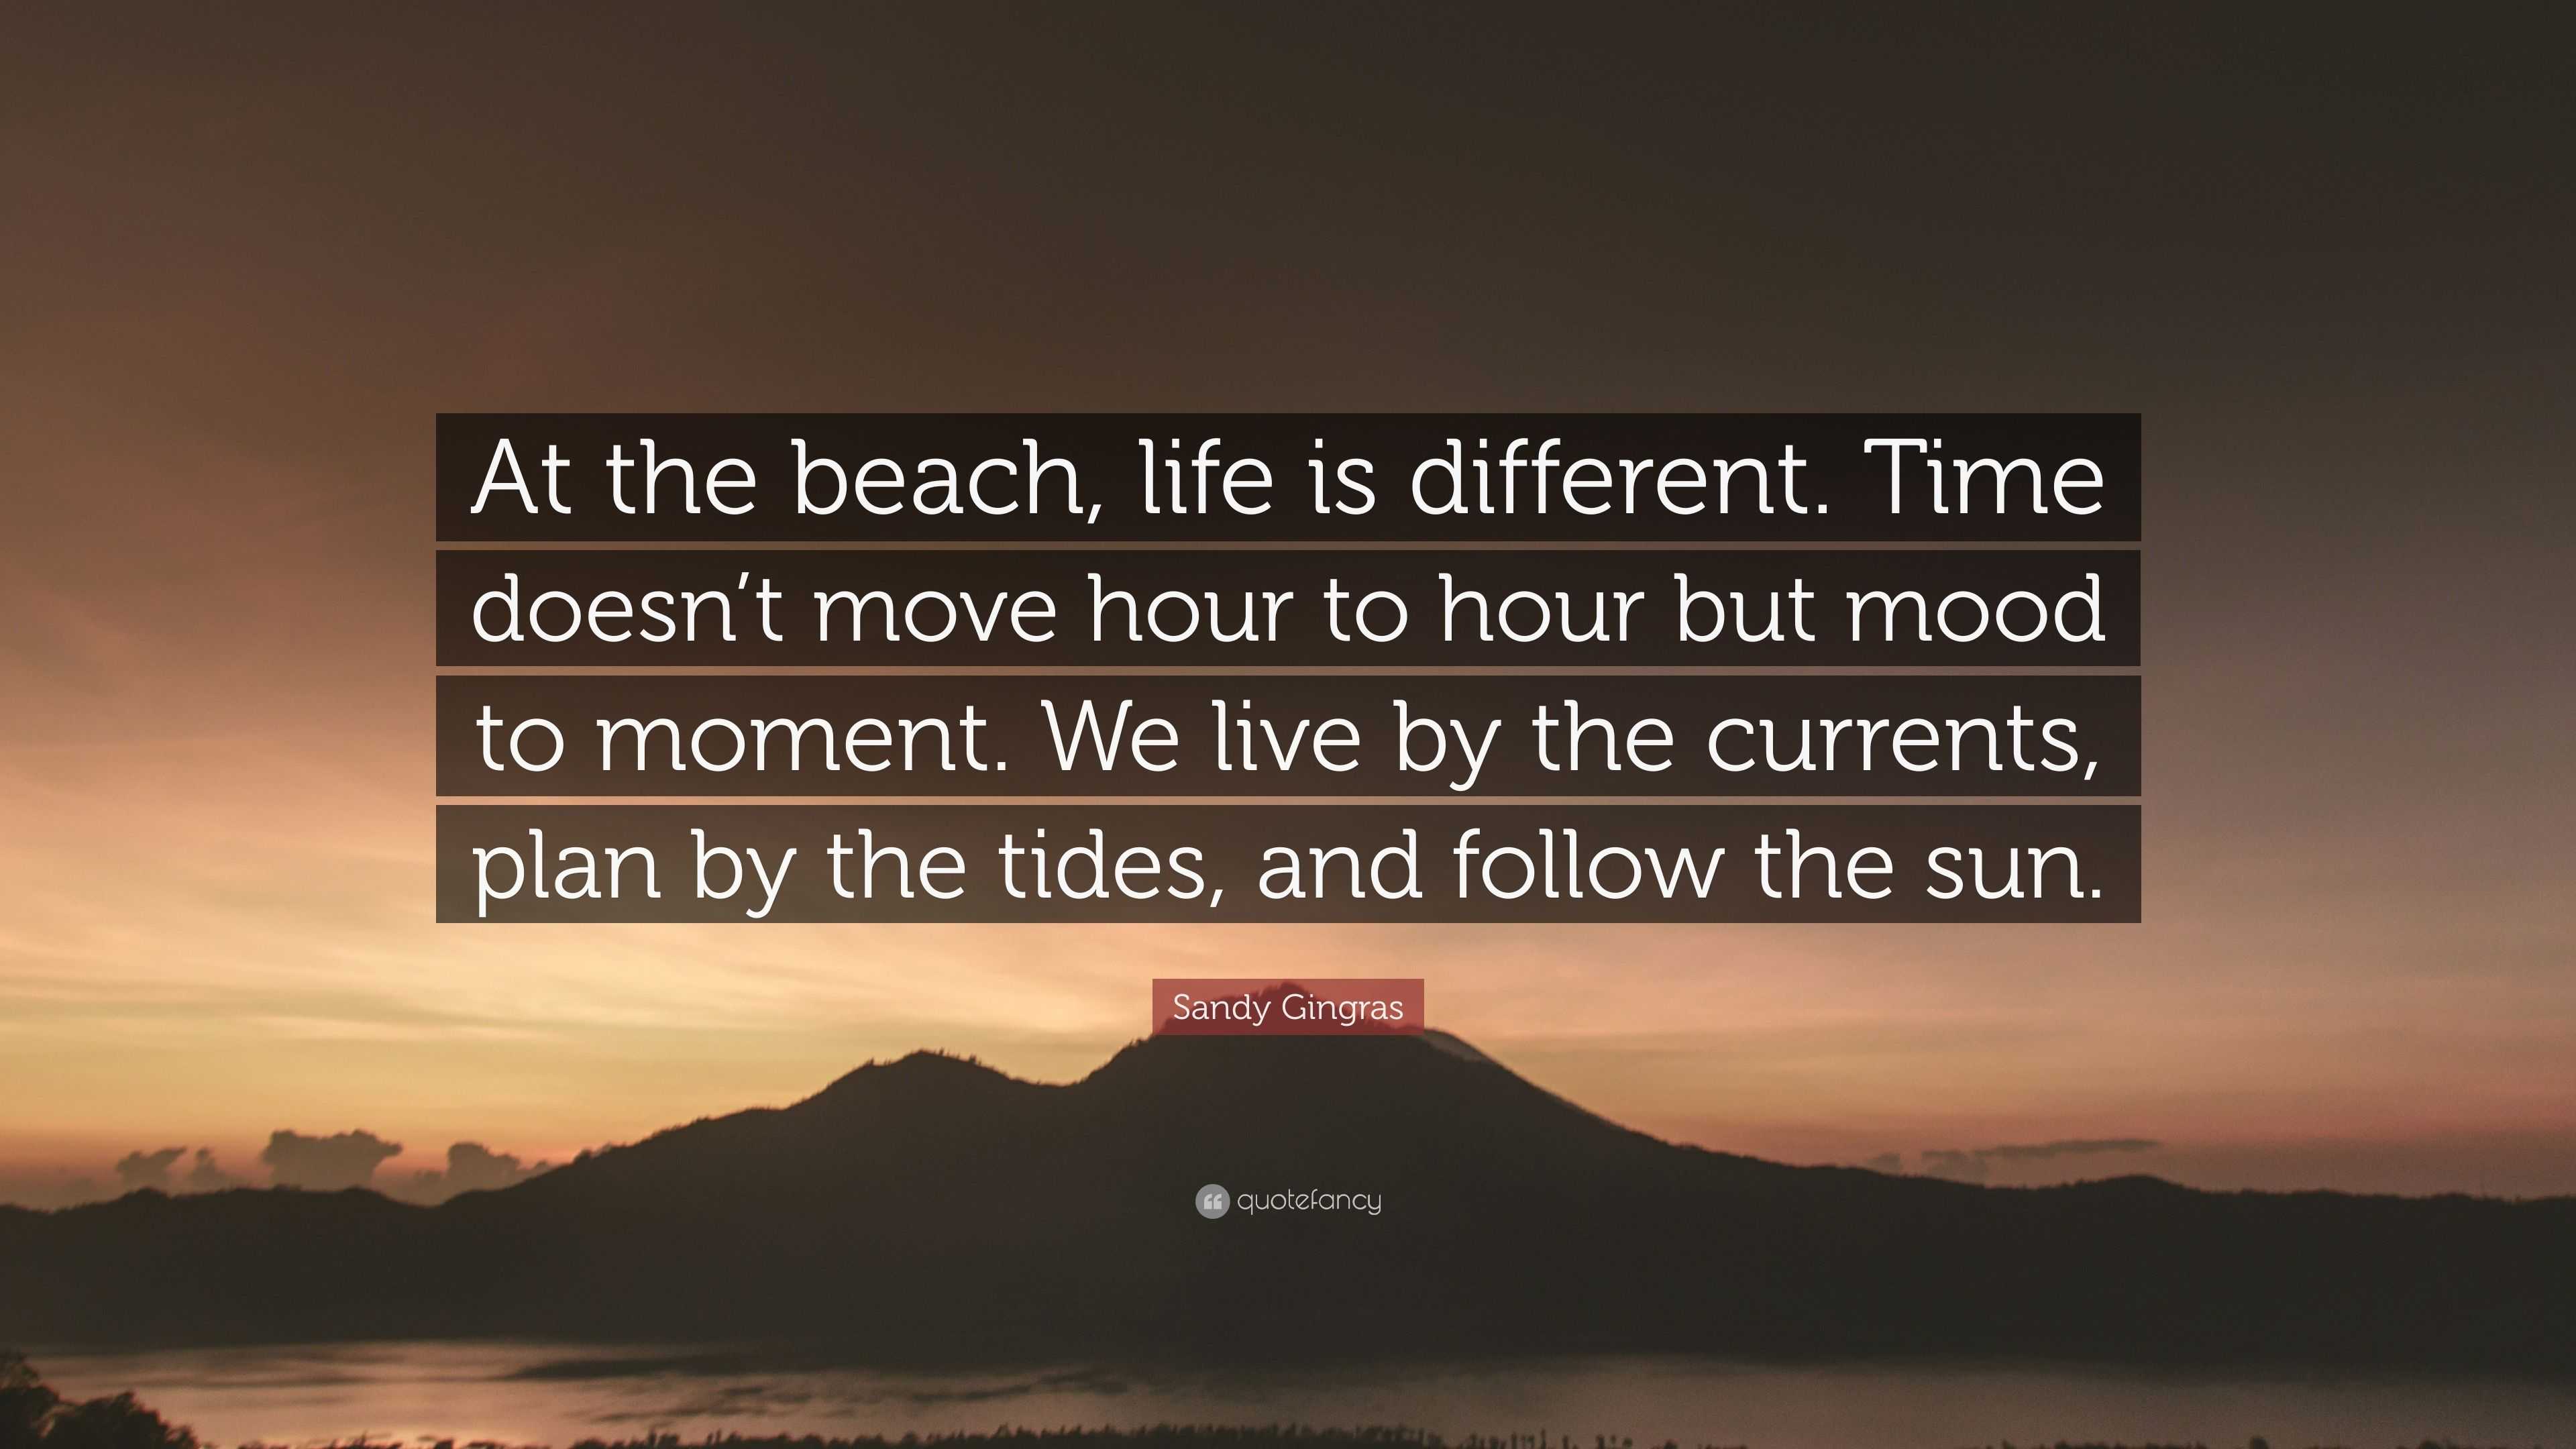 at the beach life is different quote